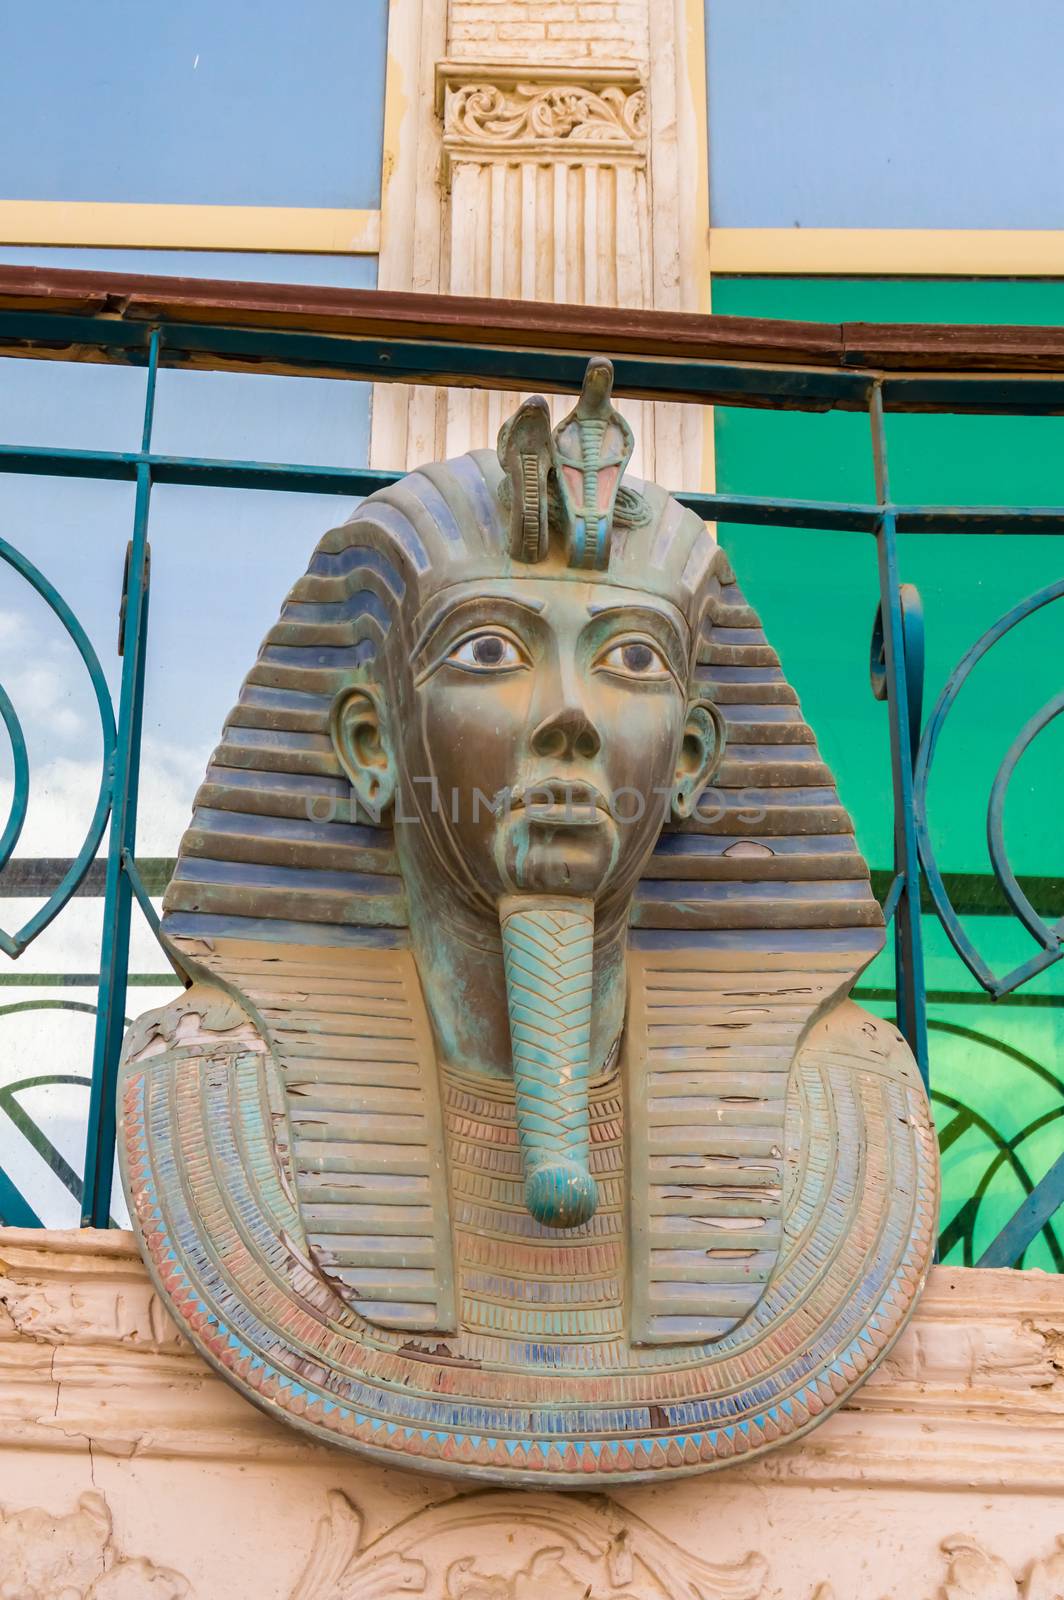 Reproduction of the head of the sarcophagus of Tutankhamun on a balcony of a hotel in Hurghada in Egypt